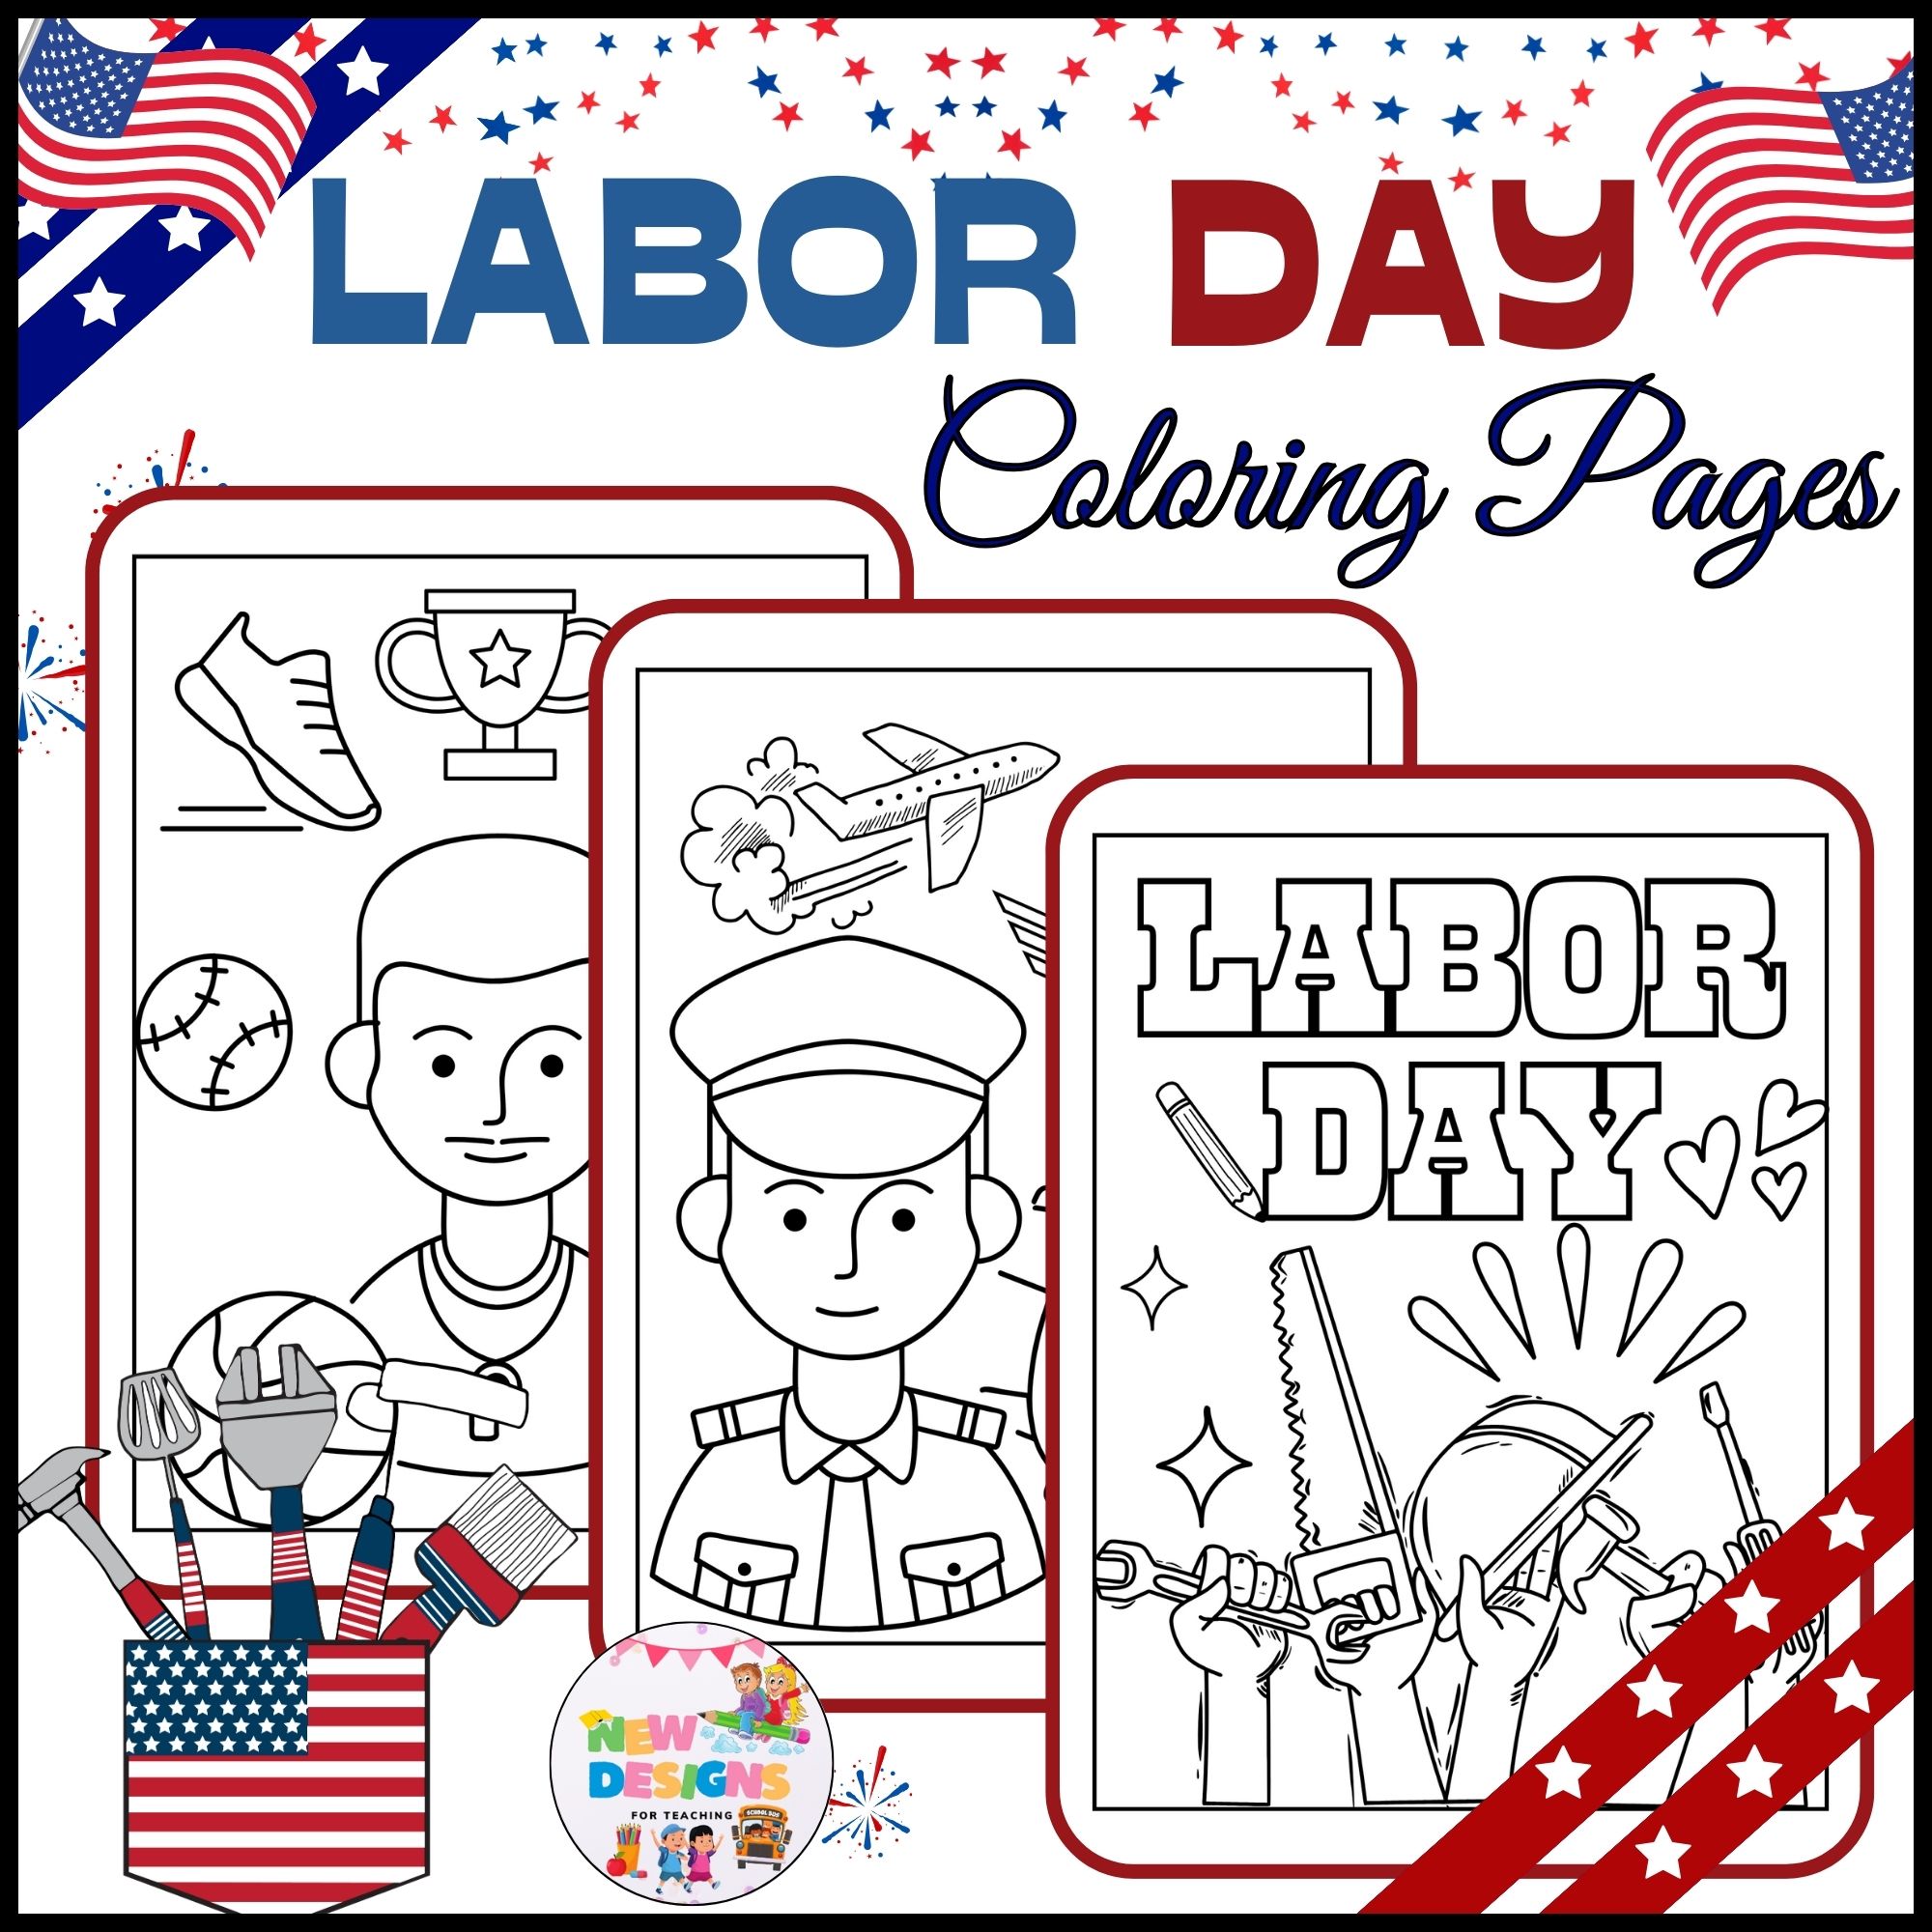 Labor day coloring pages printable worksheets for kids made by teachers